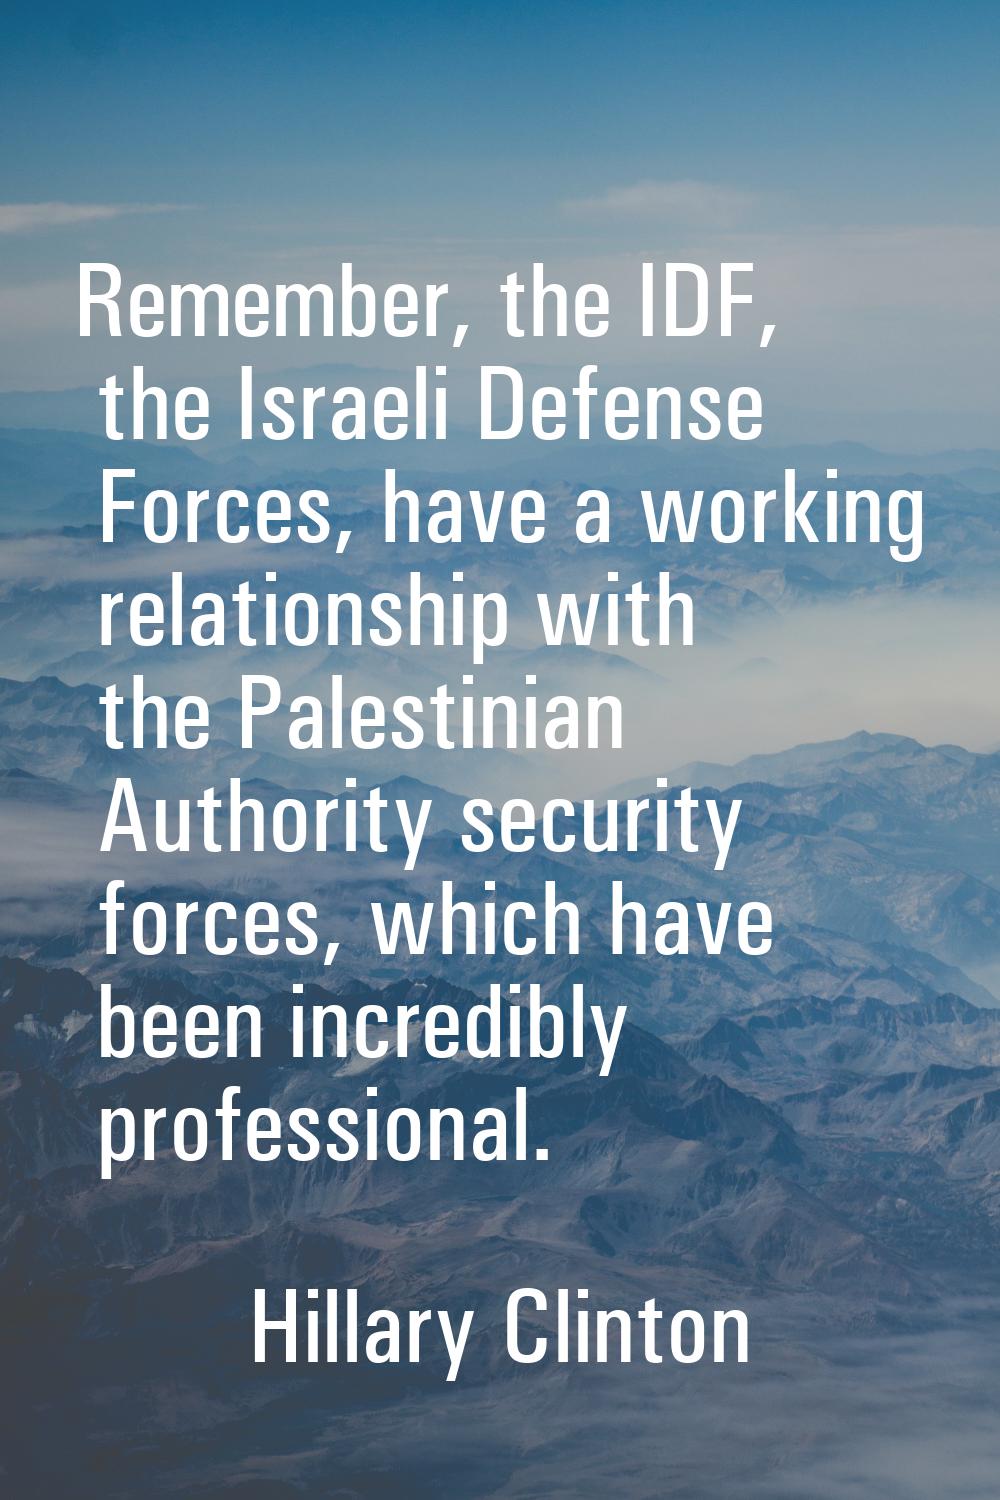 Remember, the IDF, the Israeli Defense Forces, have a working relationship with the Palestinian Aut